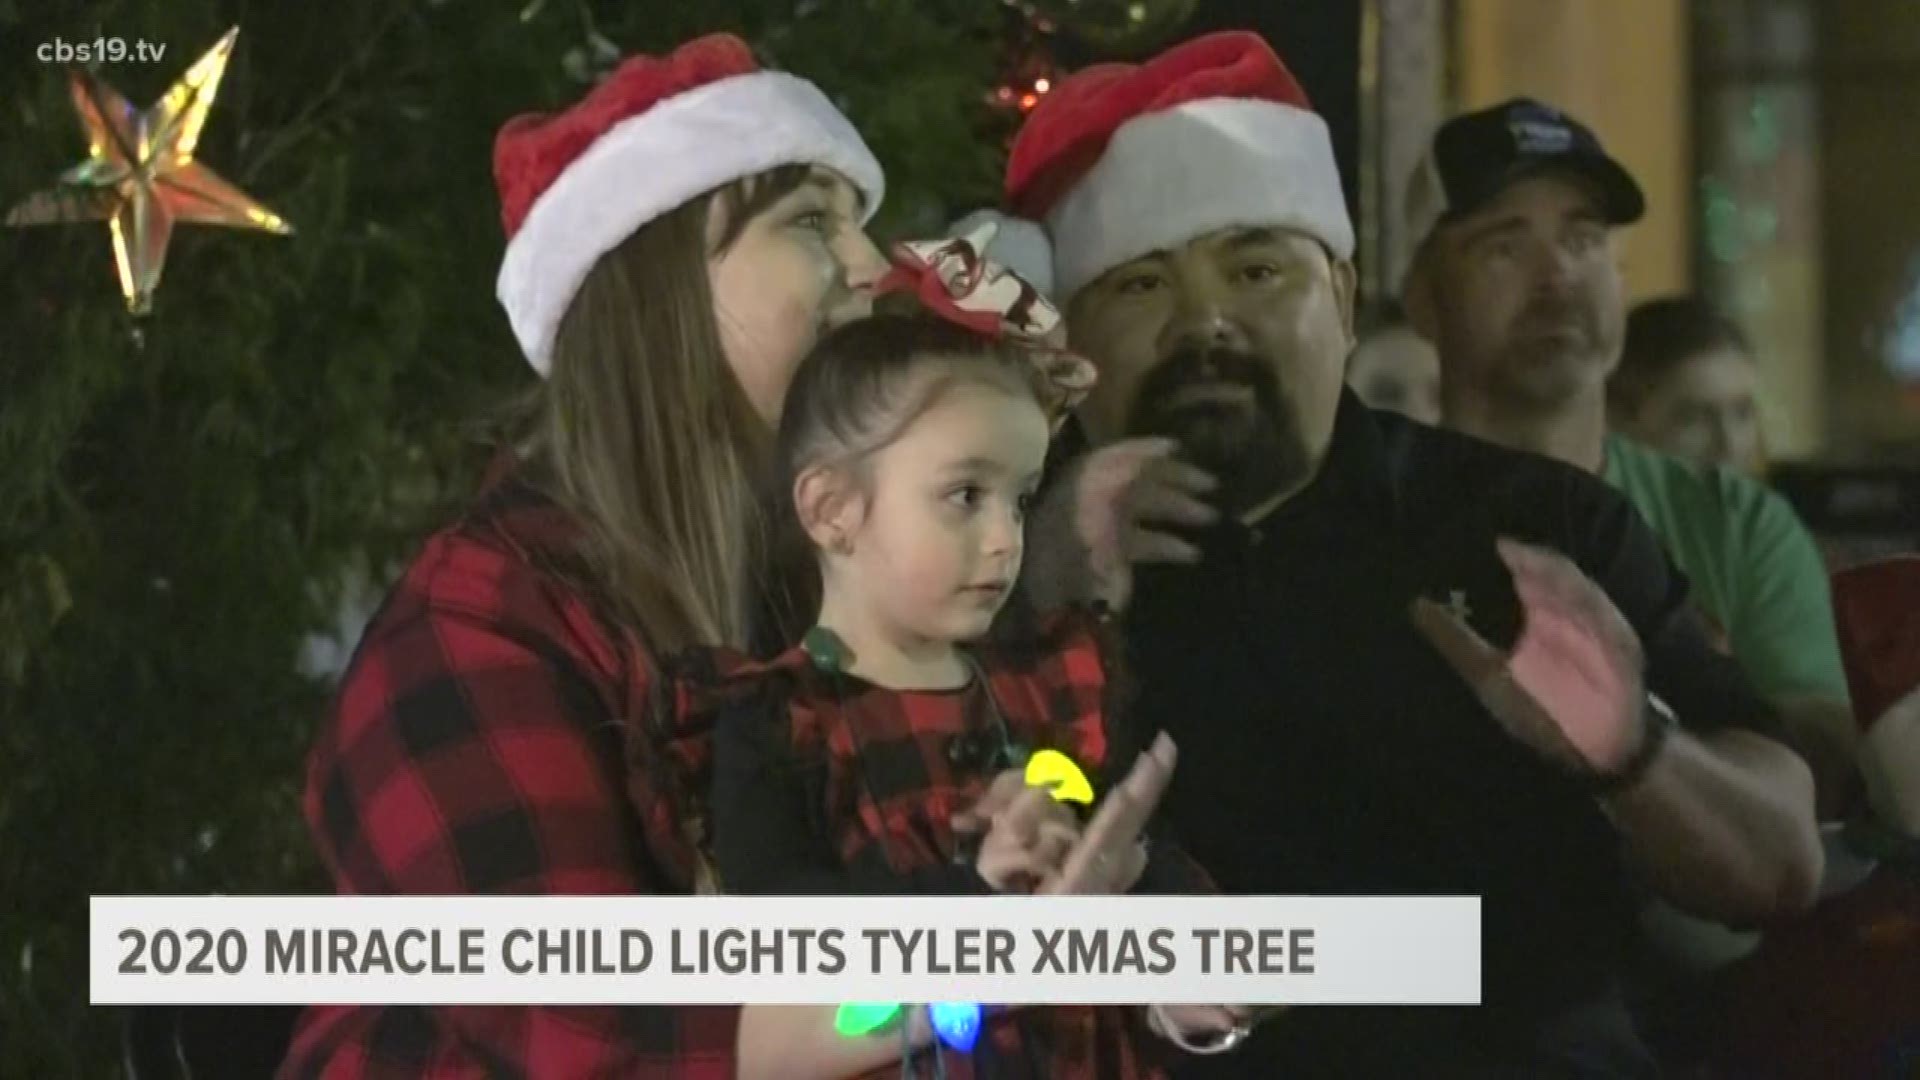 This year’s Christmas tree lighting ceremony was highlighted by the 2020 Christus Trinity Mother Francis miracle child Kimber Jane de la Cruz, who flipped the switch